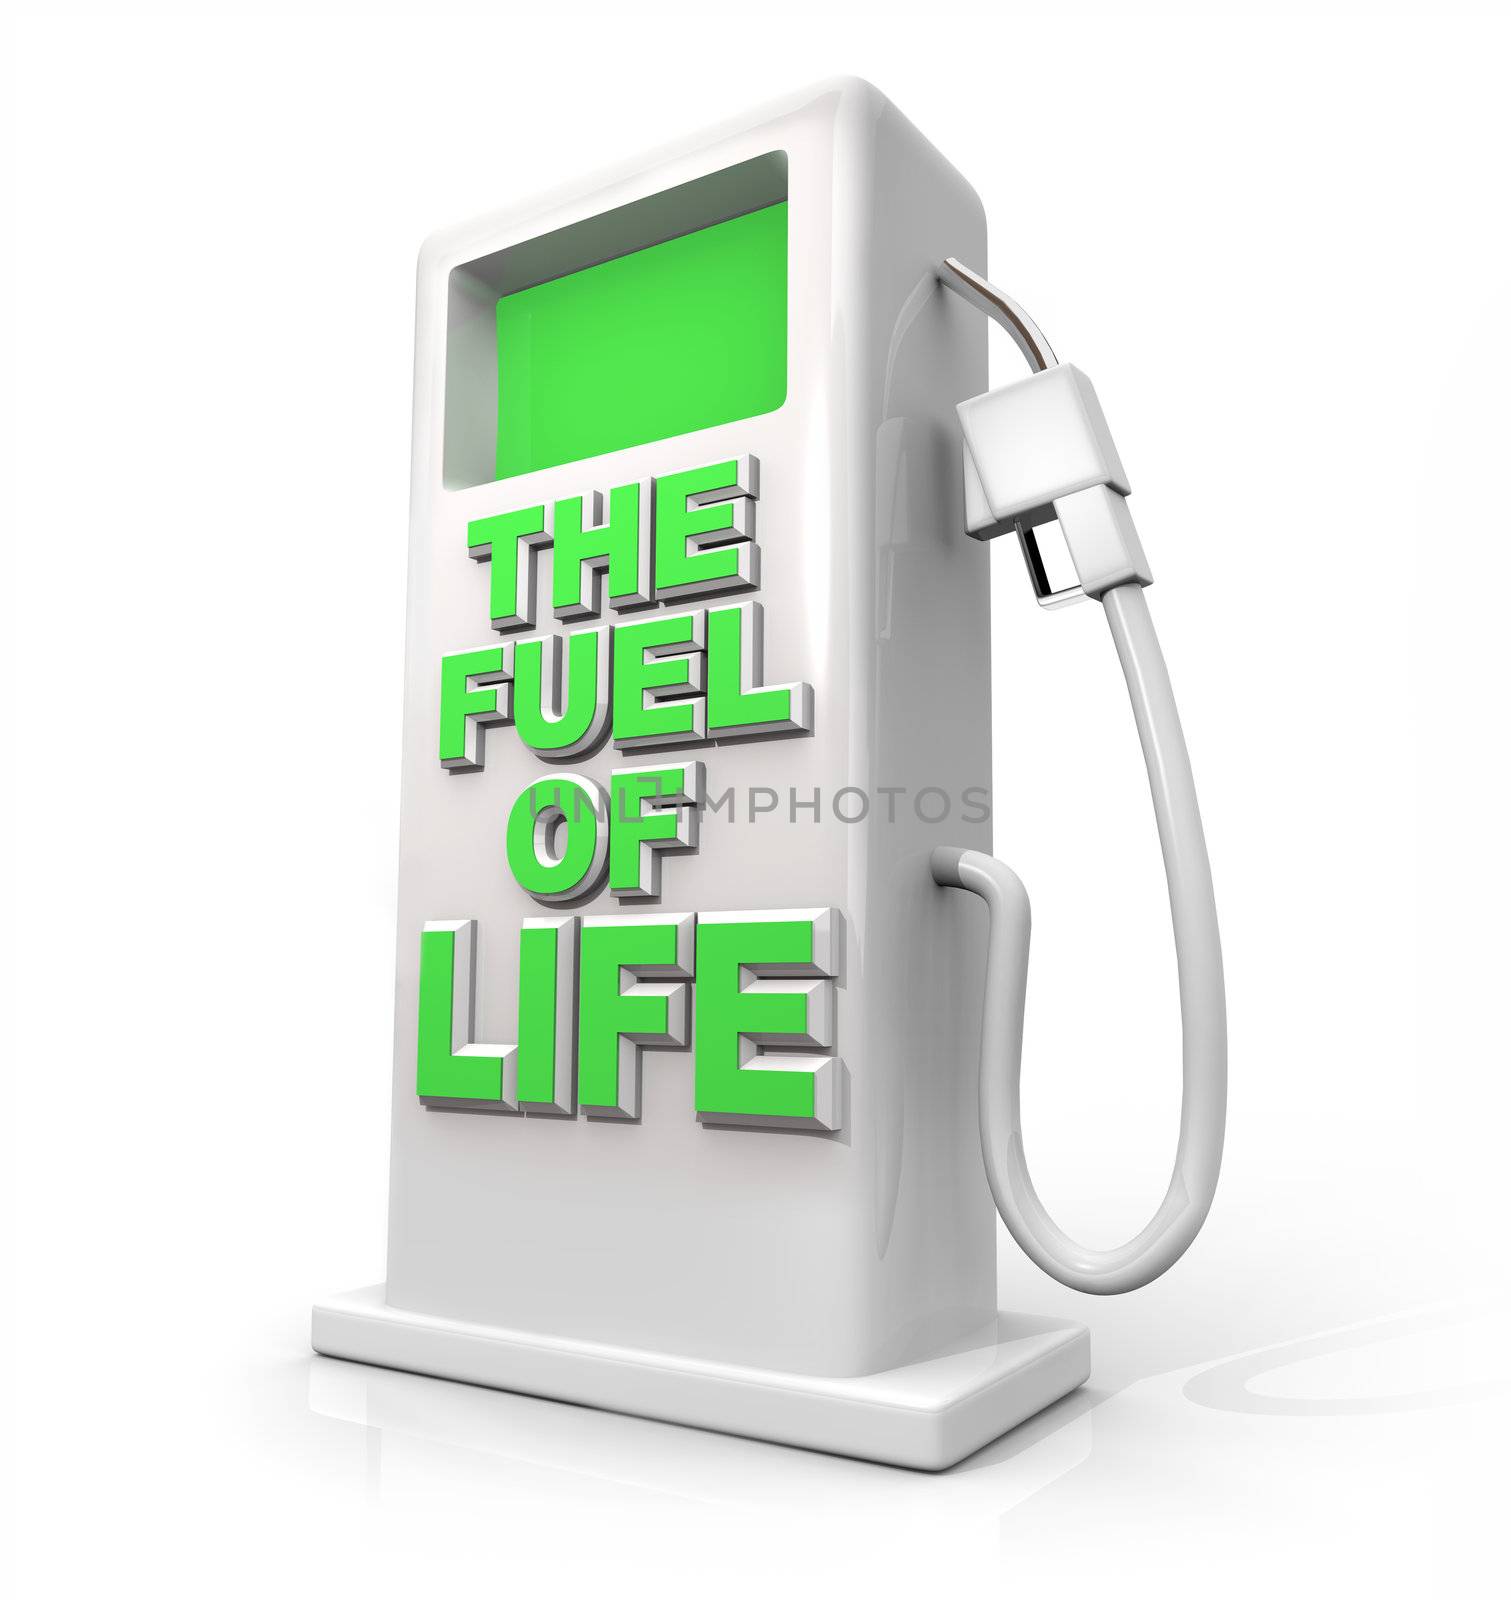 A white pump with green screen and the words The Fuel of Life on its front, symbolizing natural fuels or foods that provide power but are environmentally minded